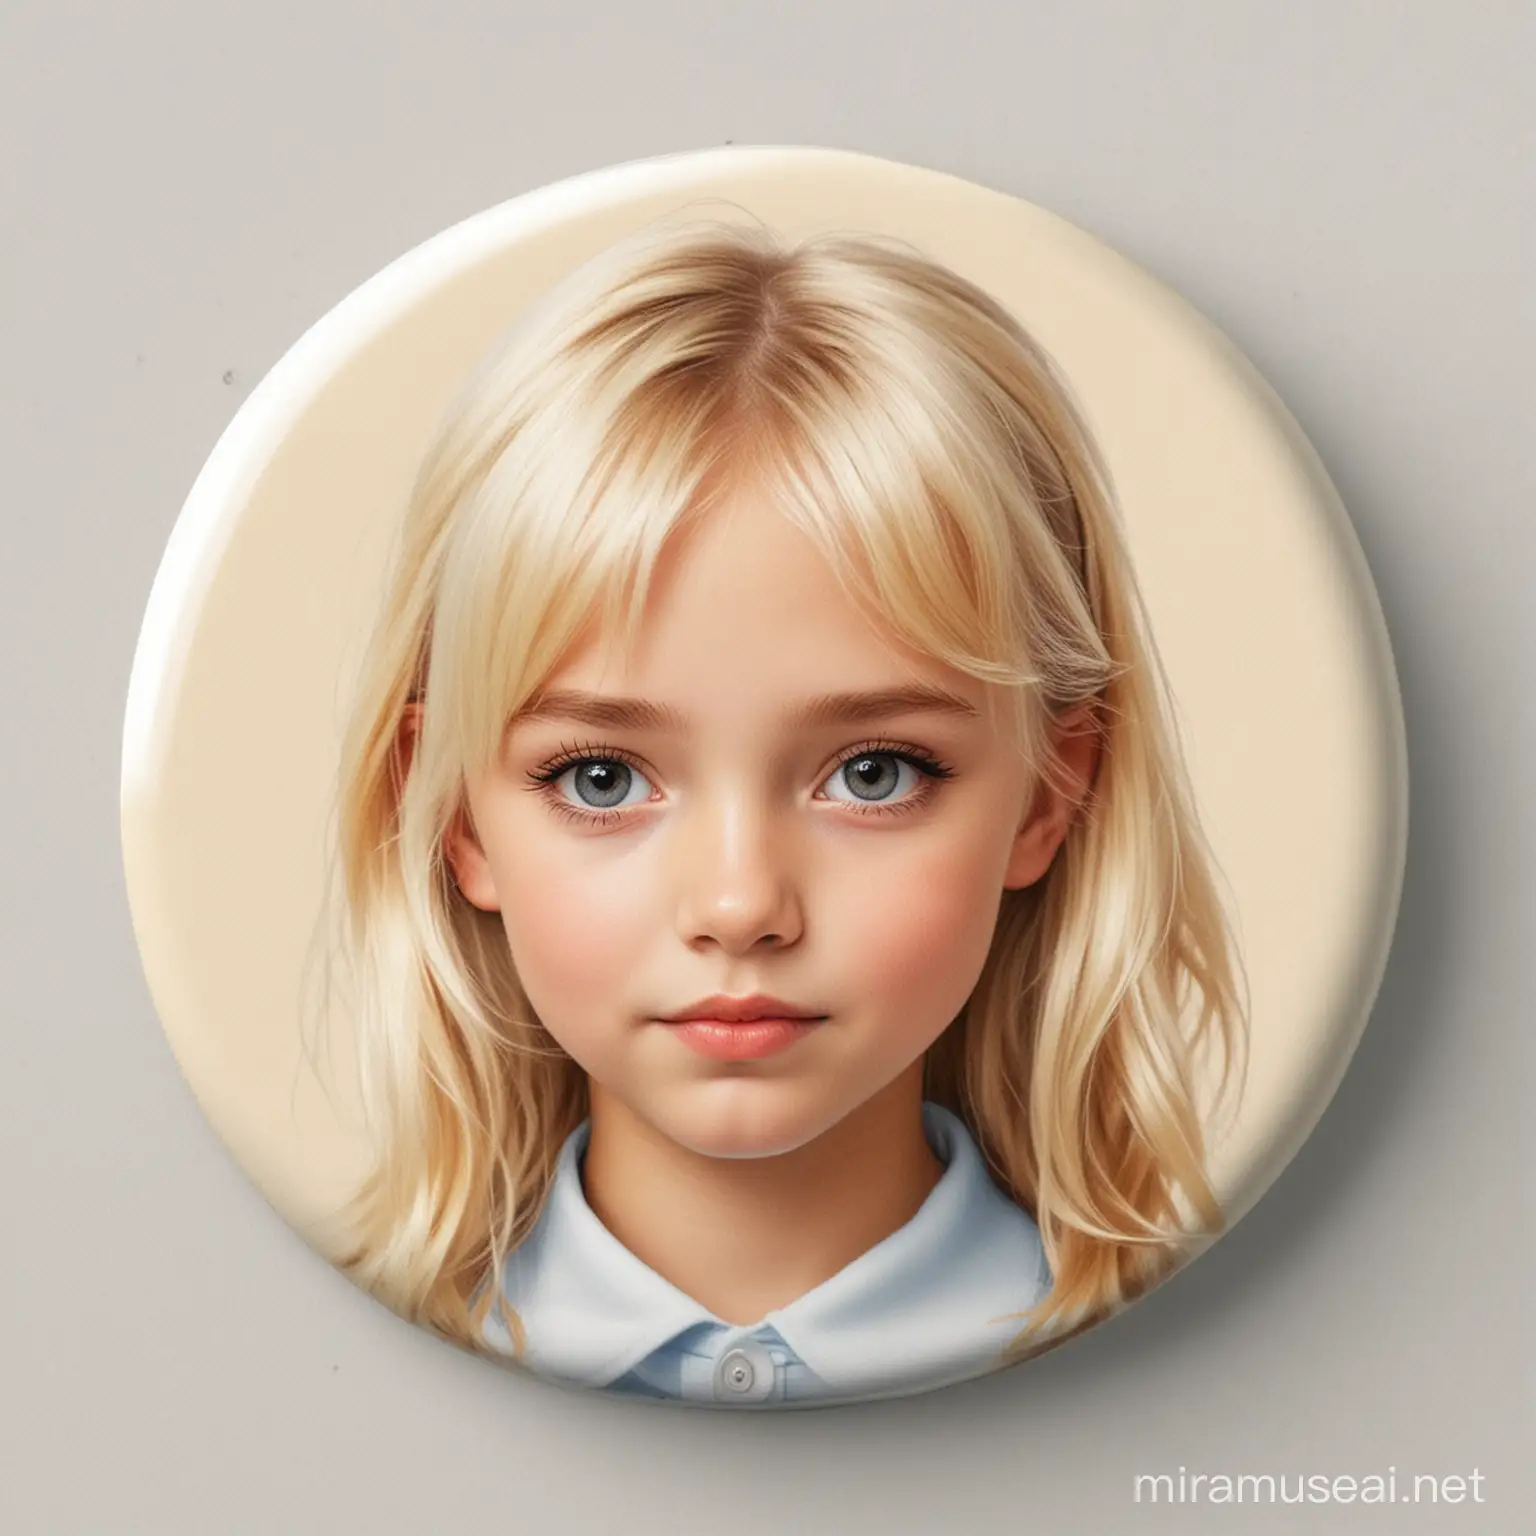 Circular Blonde Girl Portrait Badge Delicate Young Girl with Blonde Hair